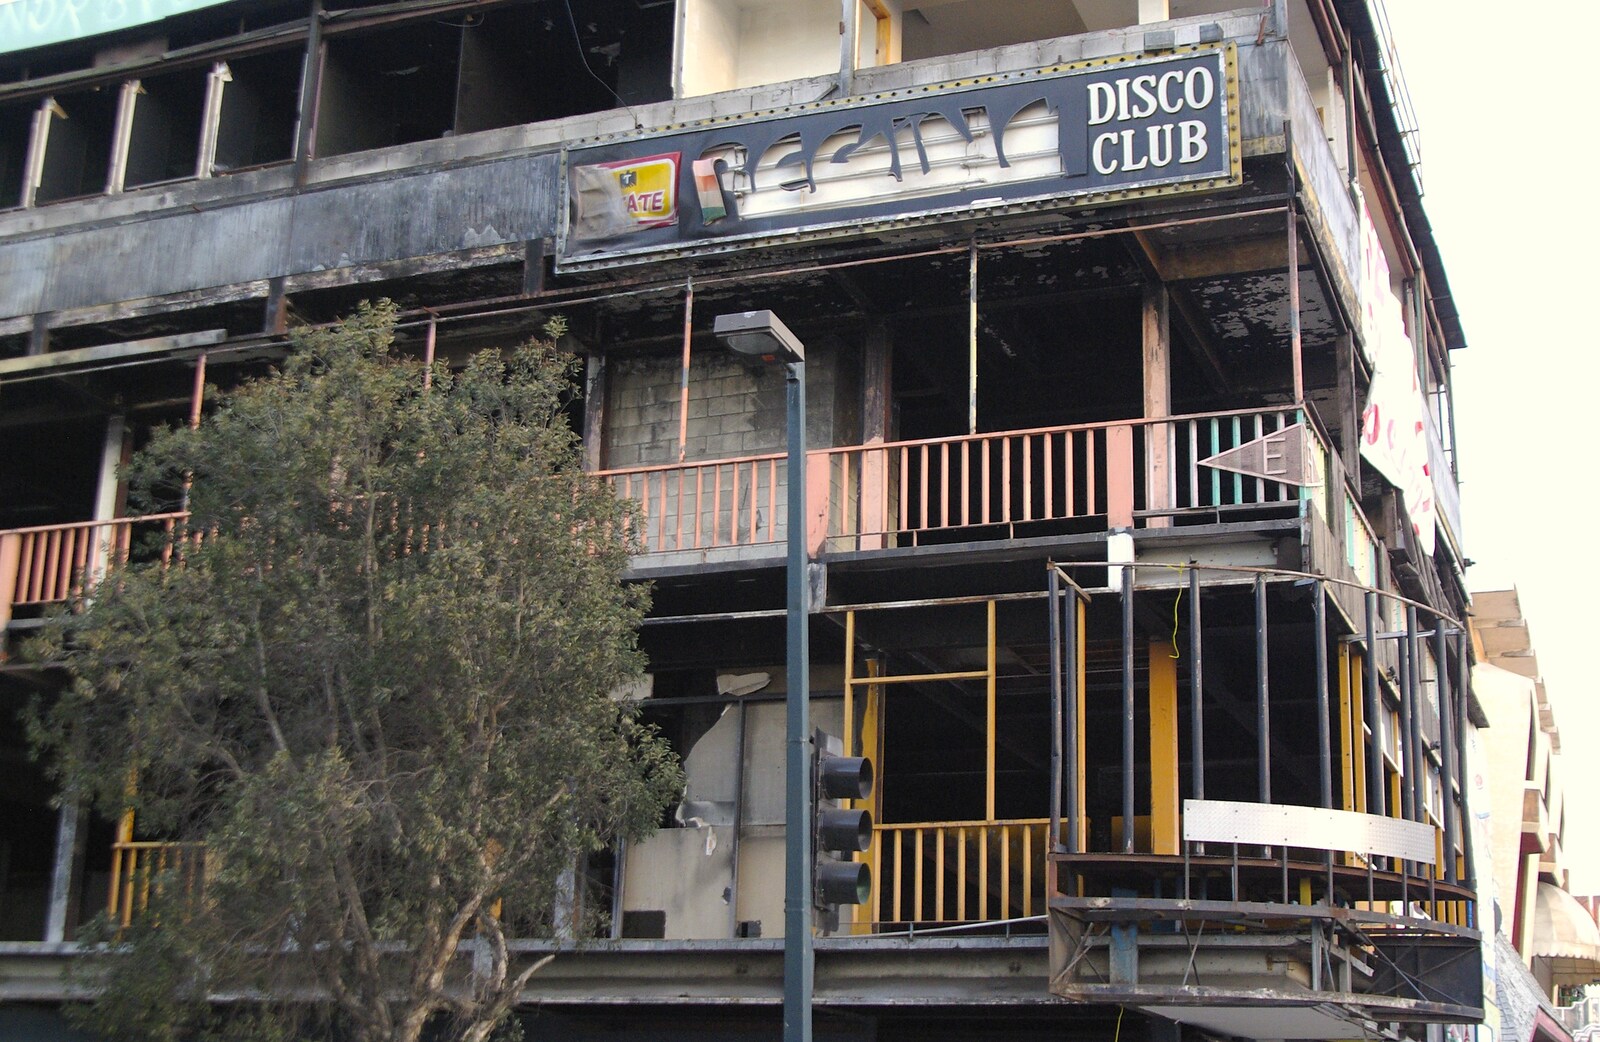 Rosarito and Tijuana, Baja California, Mexico - 2nd March 2008: A burnt-out building